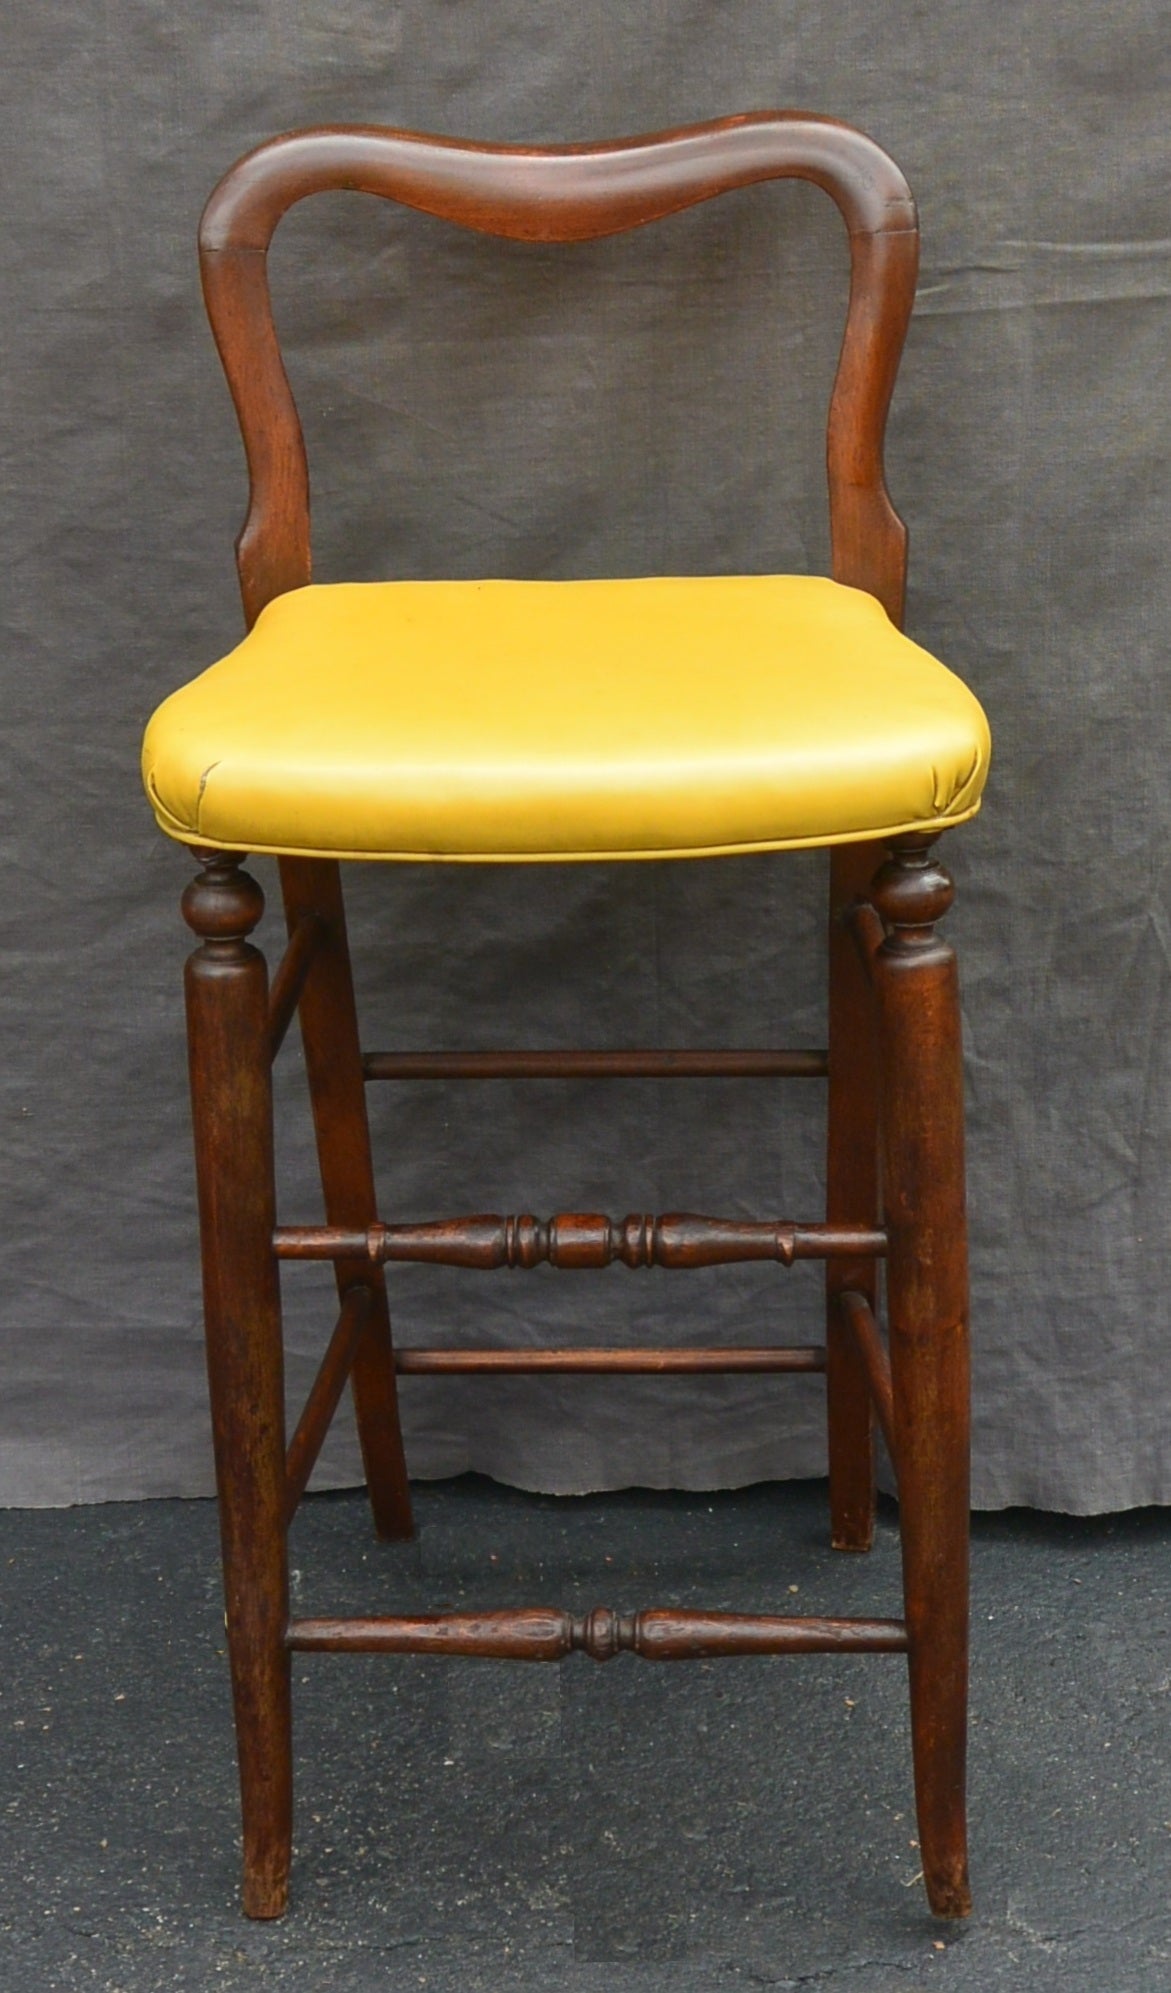 Yellow upholstered mahogany barstool. Charming mahogany open back kitchen bar stool with yellow vinyl upholstery. United States, late 19th century
Dimension: Seat 15.5